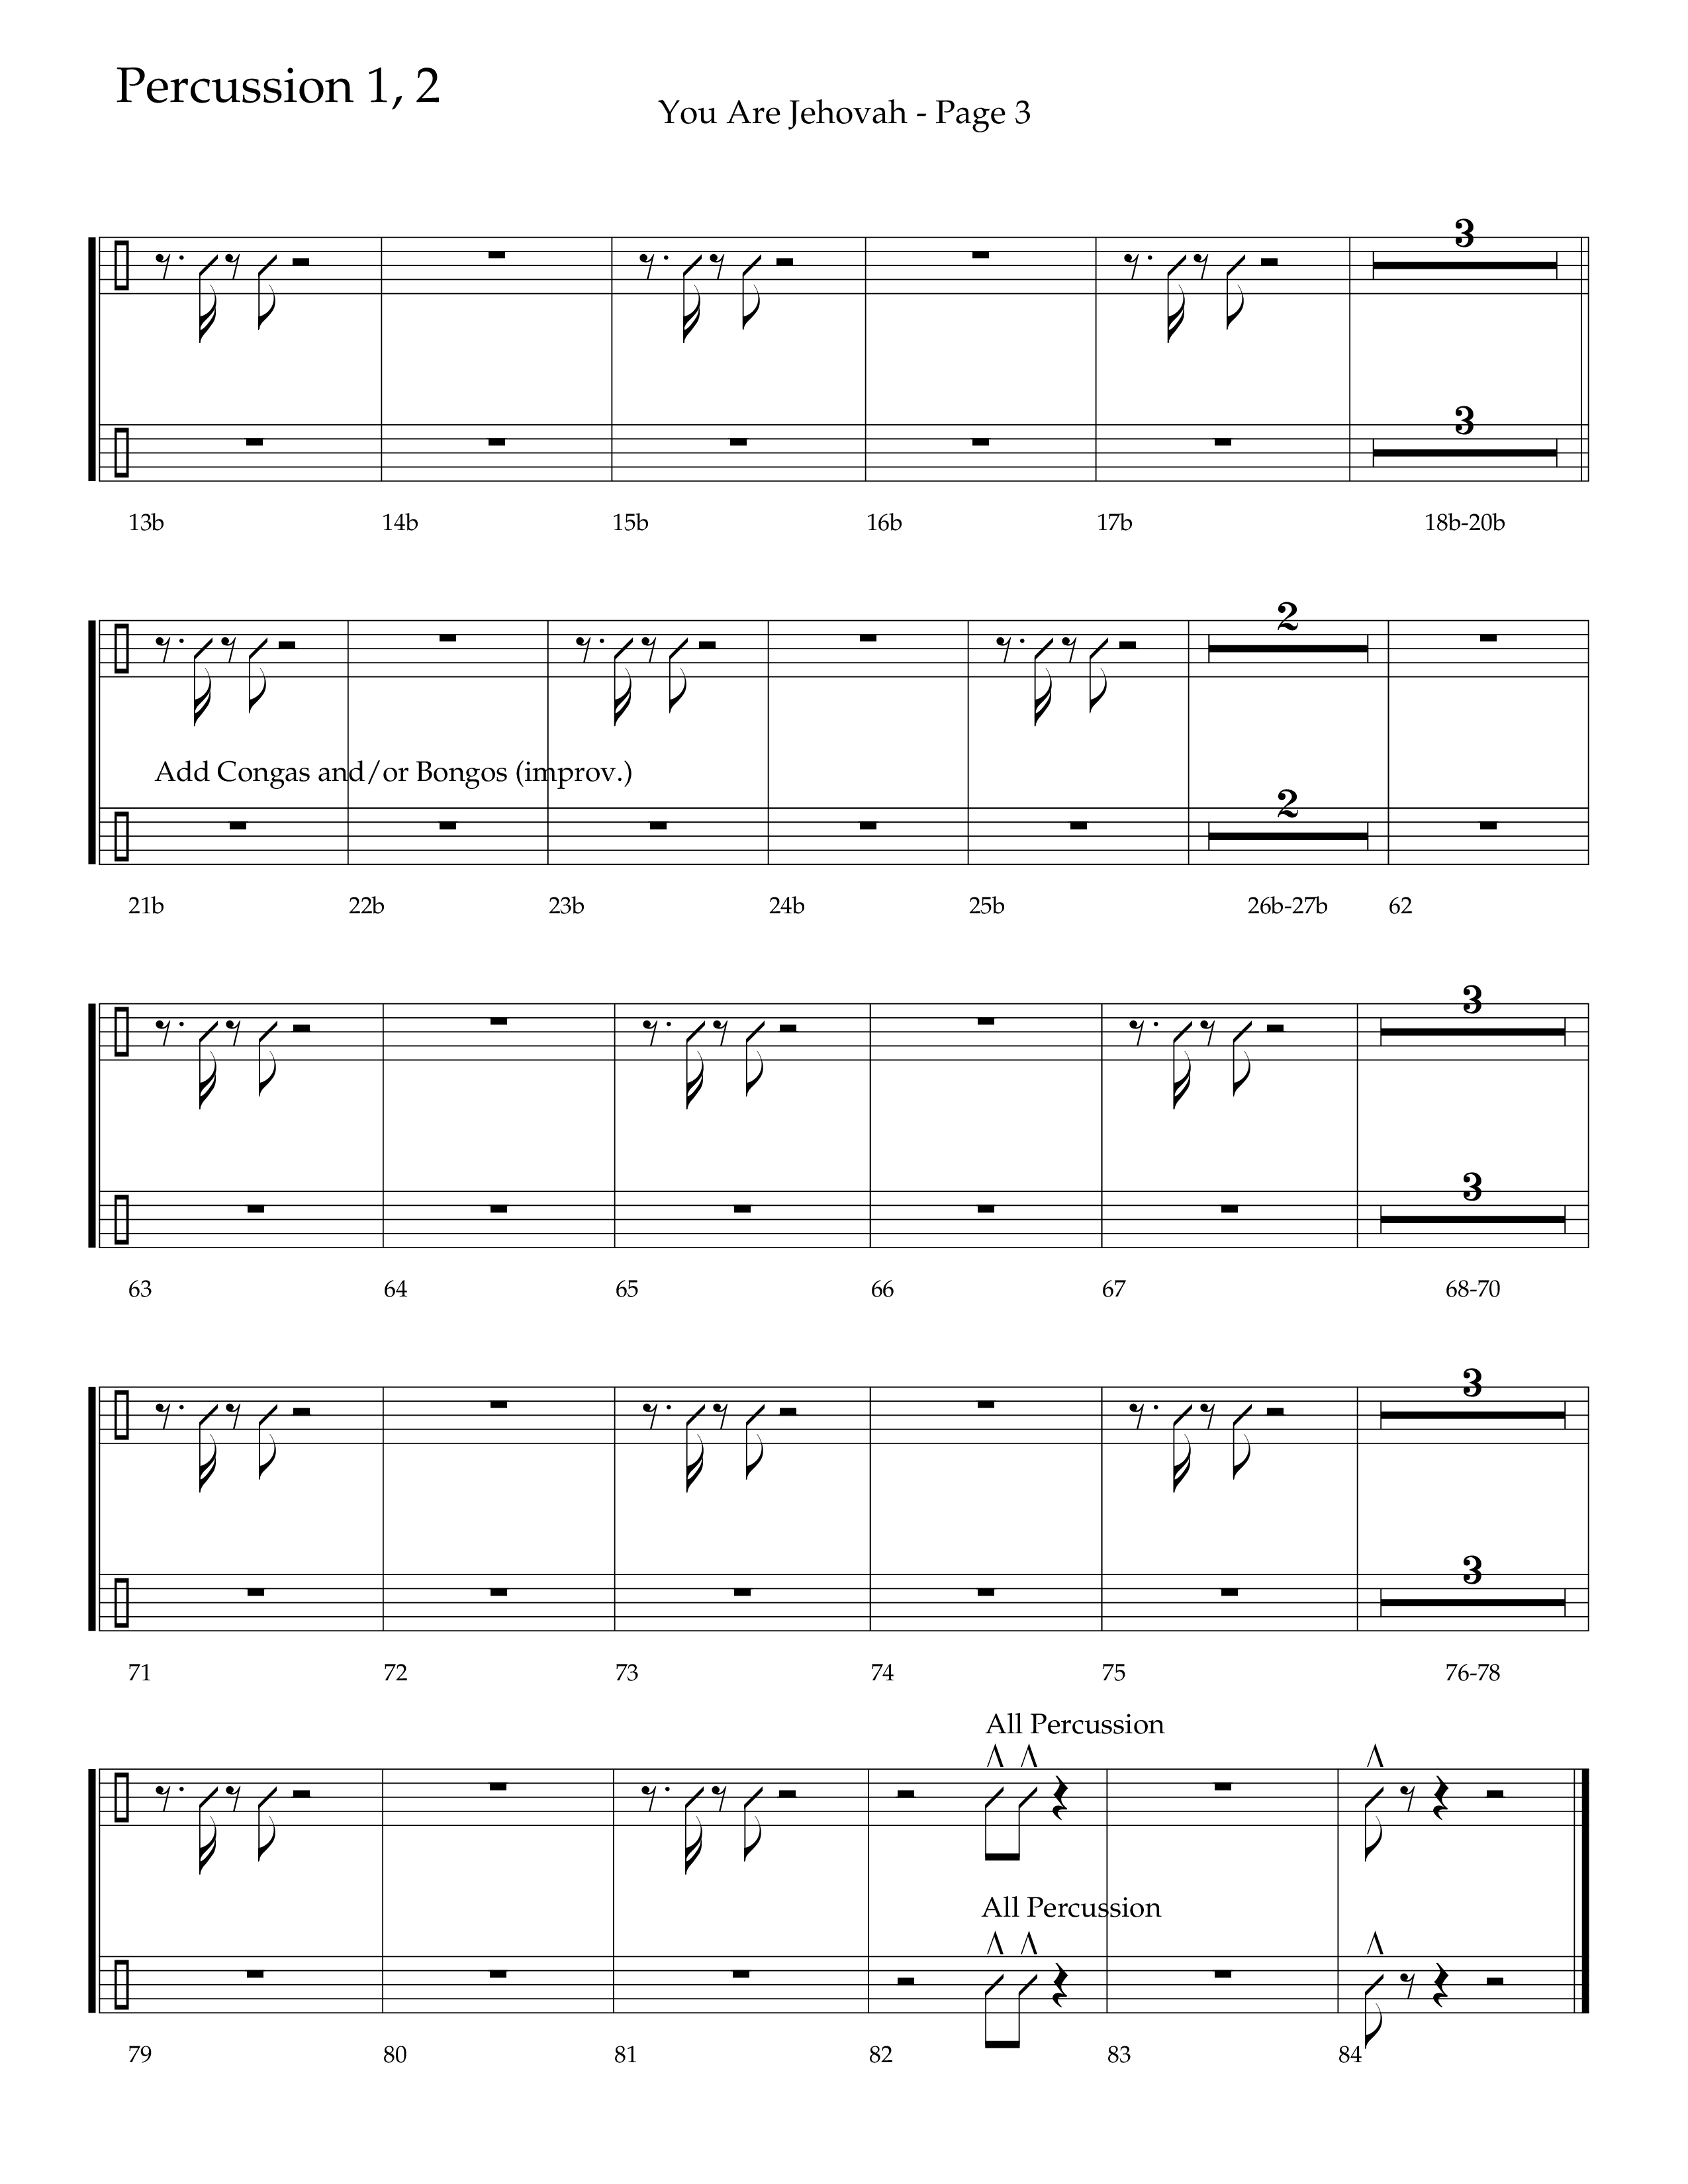 You Are Jehovah (Choral Anthem SATB) Percussion 1/2 (Lifeway Choral / Arr. Cliff Duren)